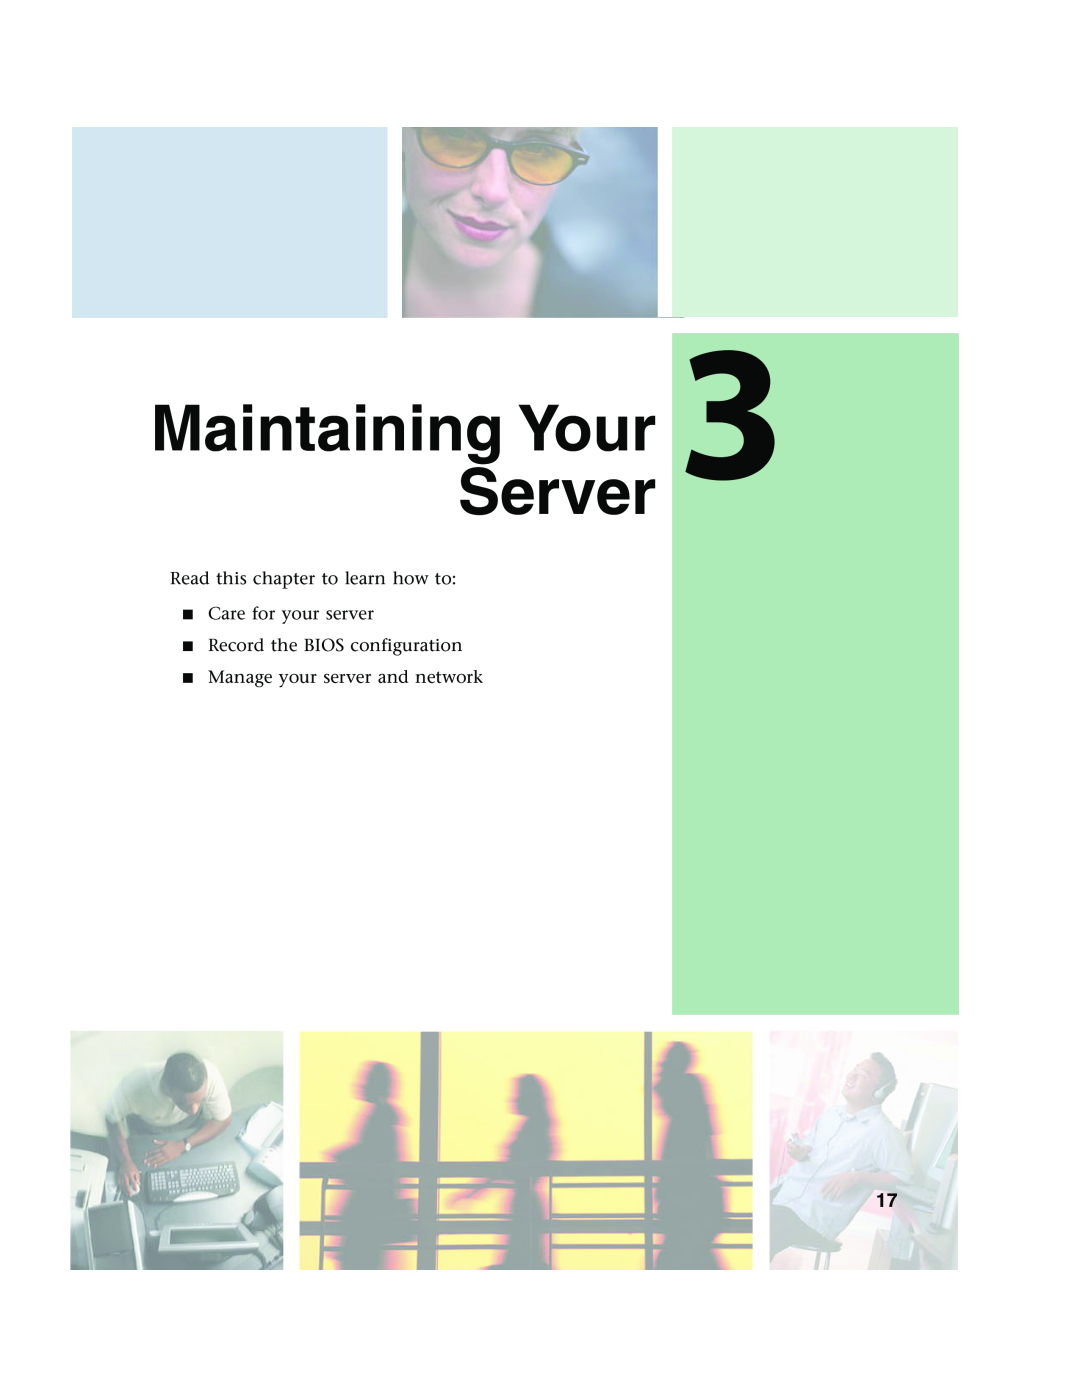 Gateway 980 manual MaintainingServerYour, Read this chapter to learn how to Care for your server 